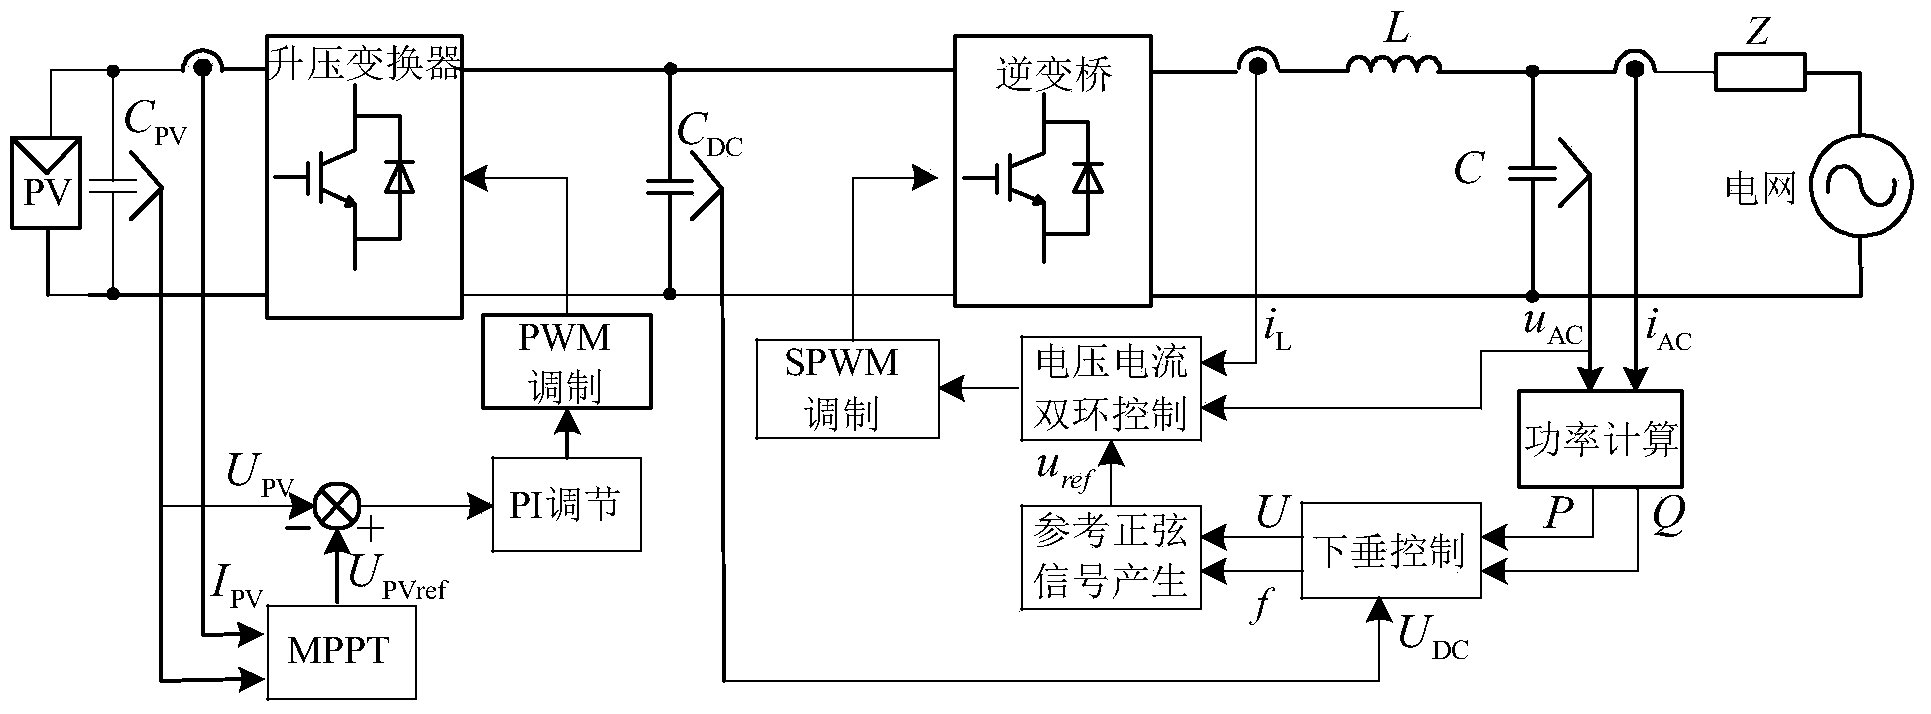 Voltage type control method for novel photovoltaic grid-connected inverter